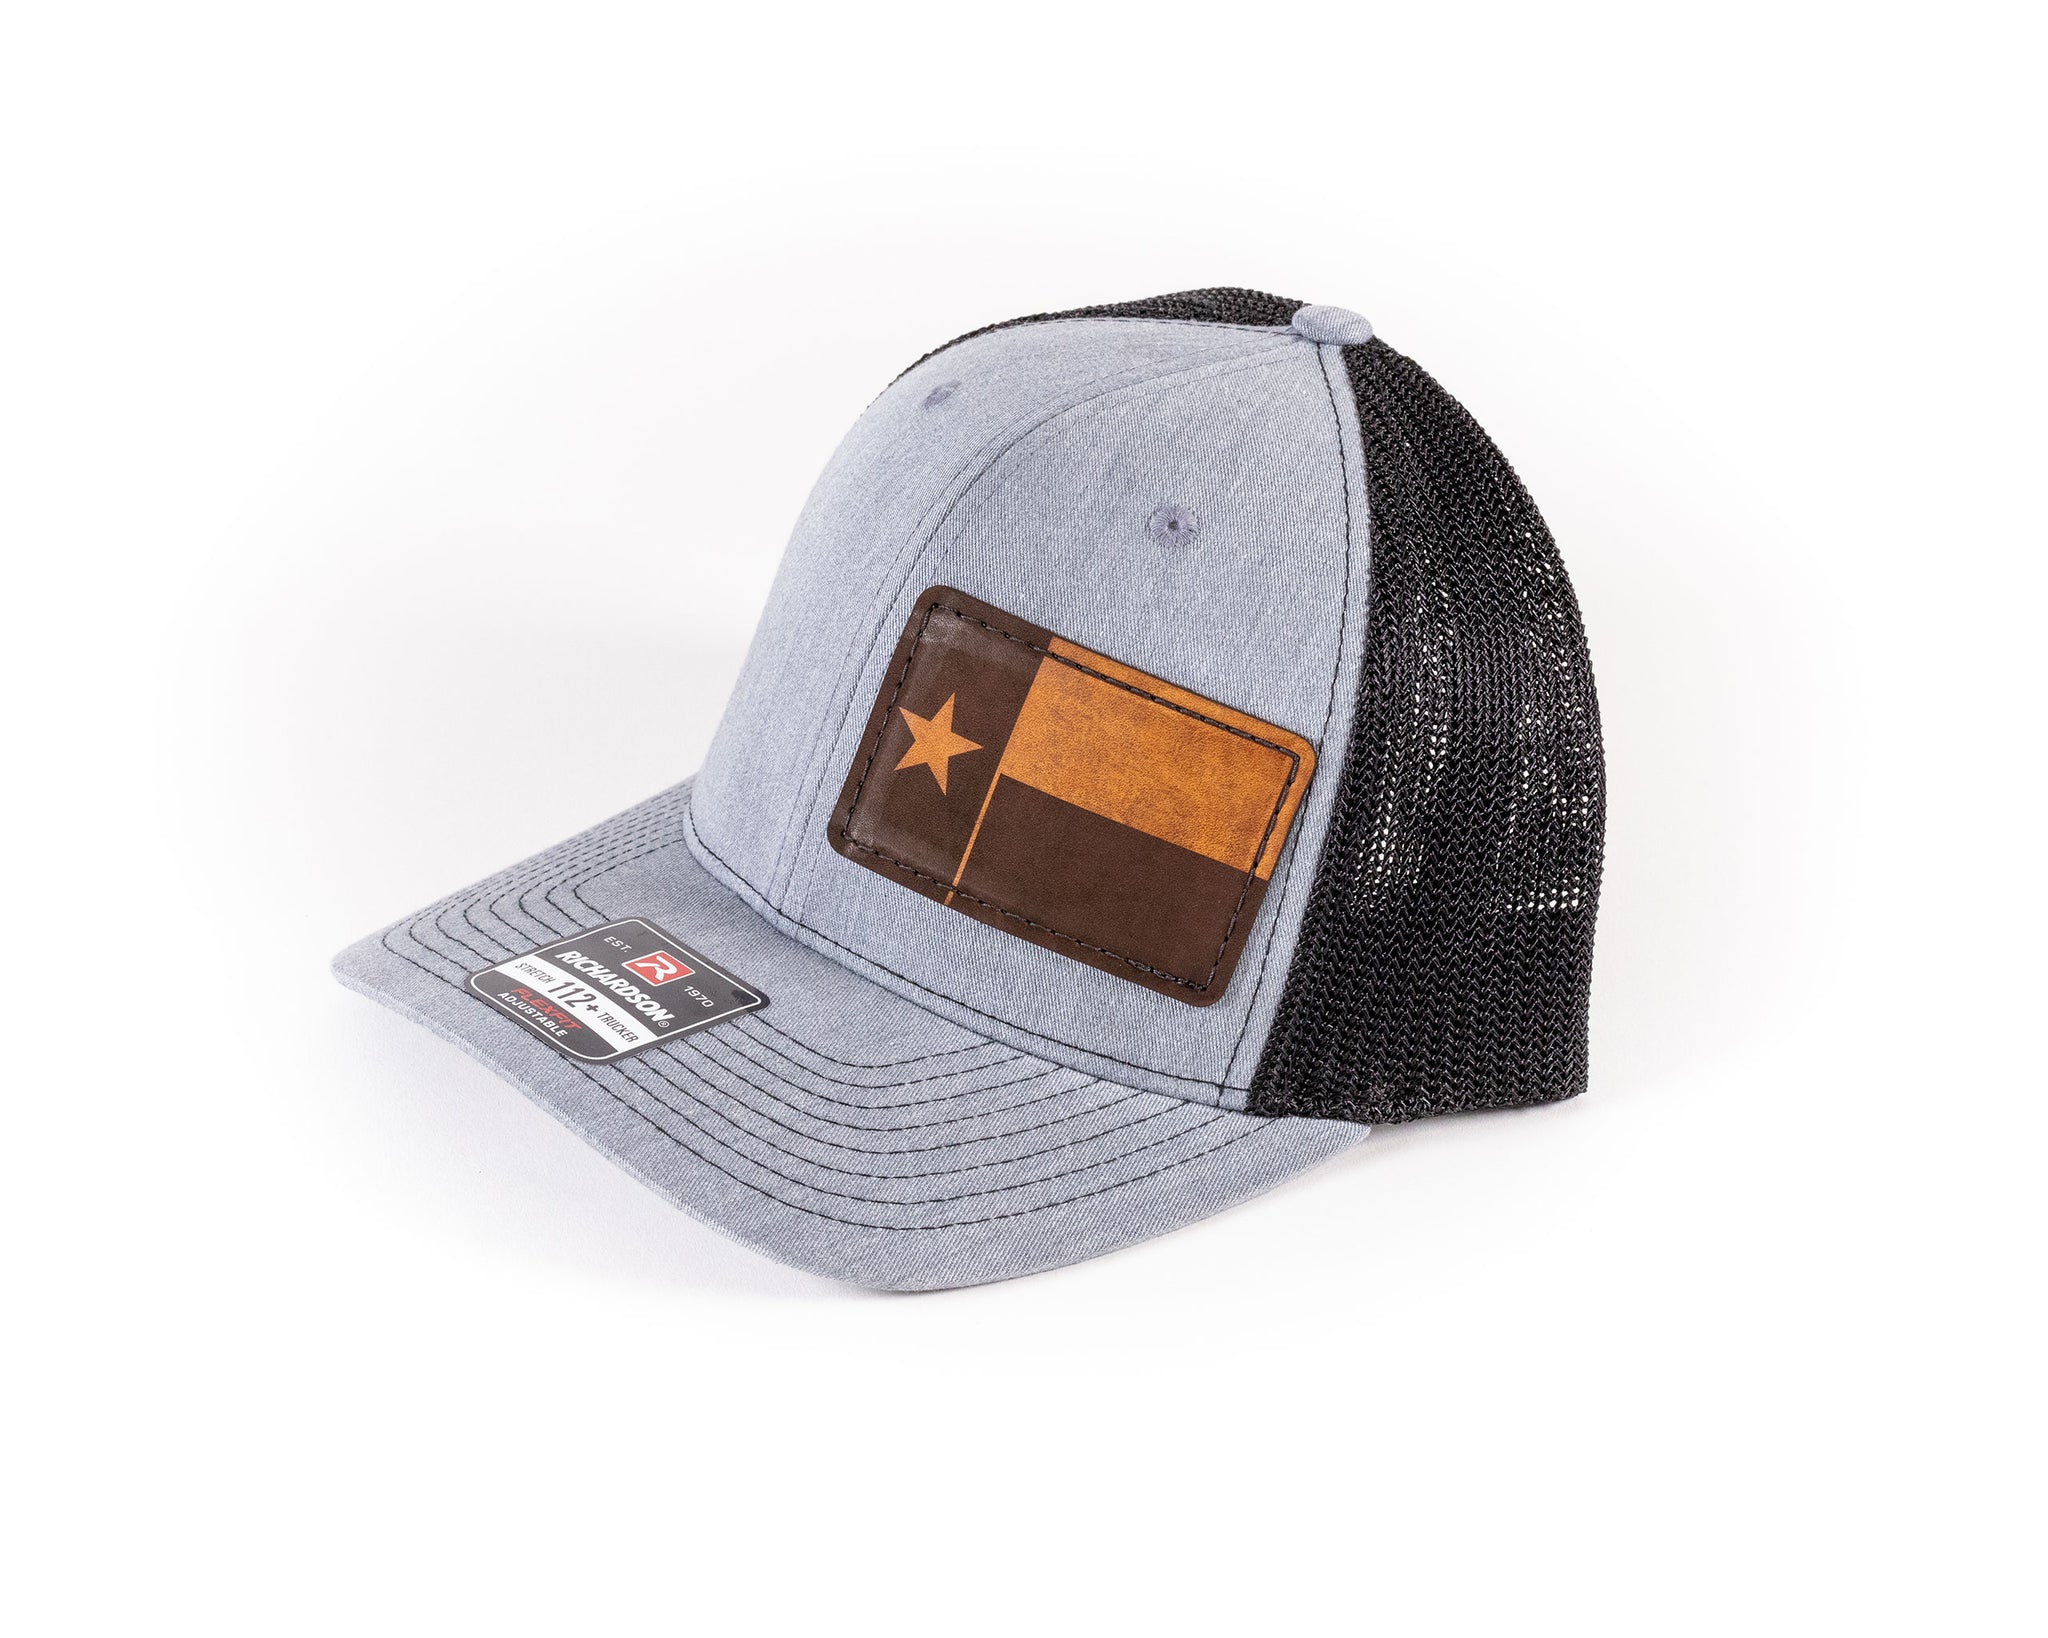 Texas Flag Hat with Leather Patch